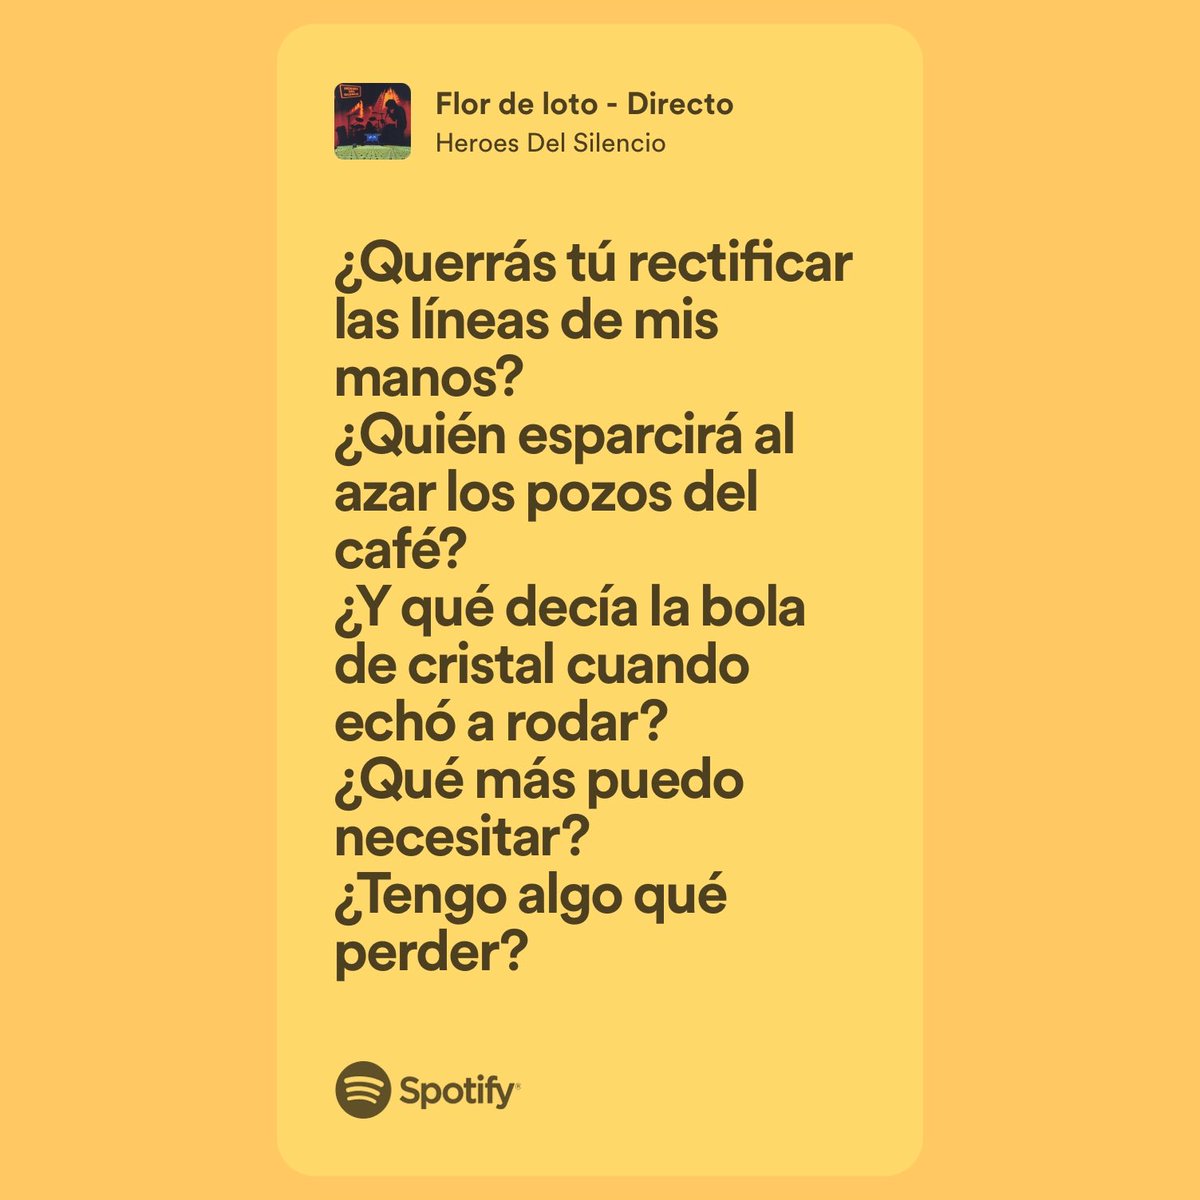 open.spotify.com/track/1dKHFRlL…